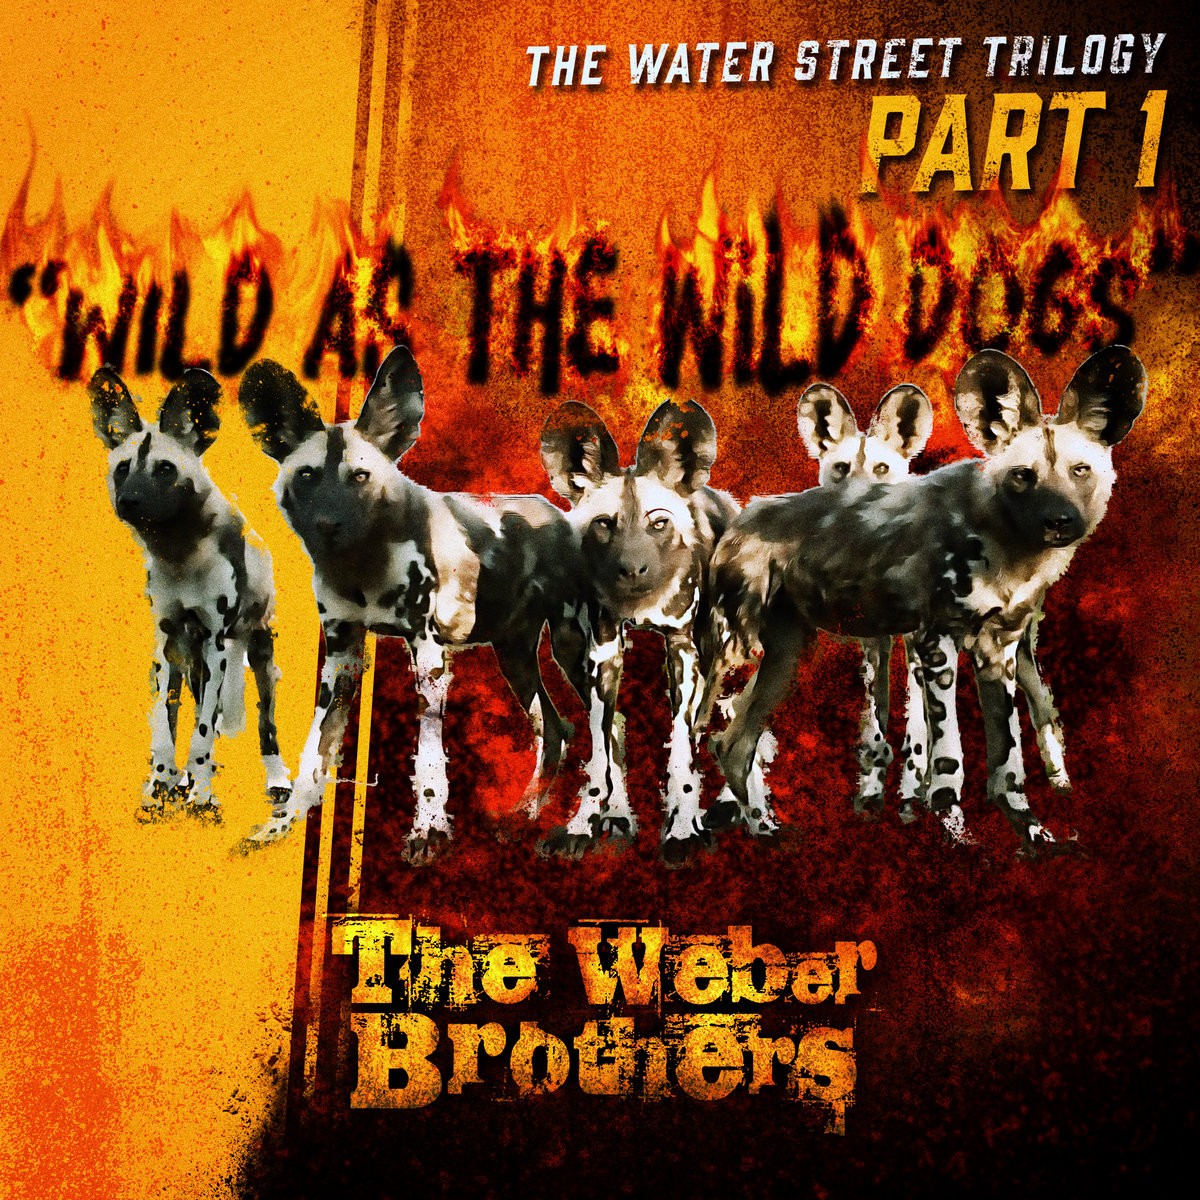 The Weber Brothers - The Water Street Trilogy Part 1 – Wild As The Wild Dogs